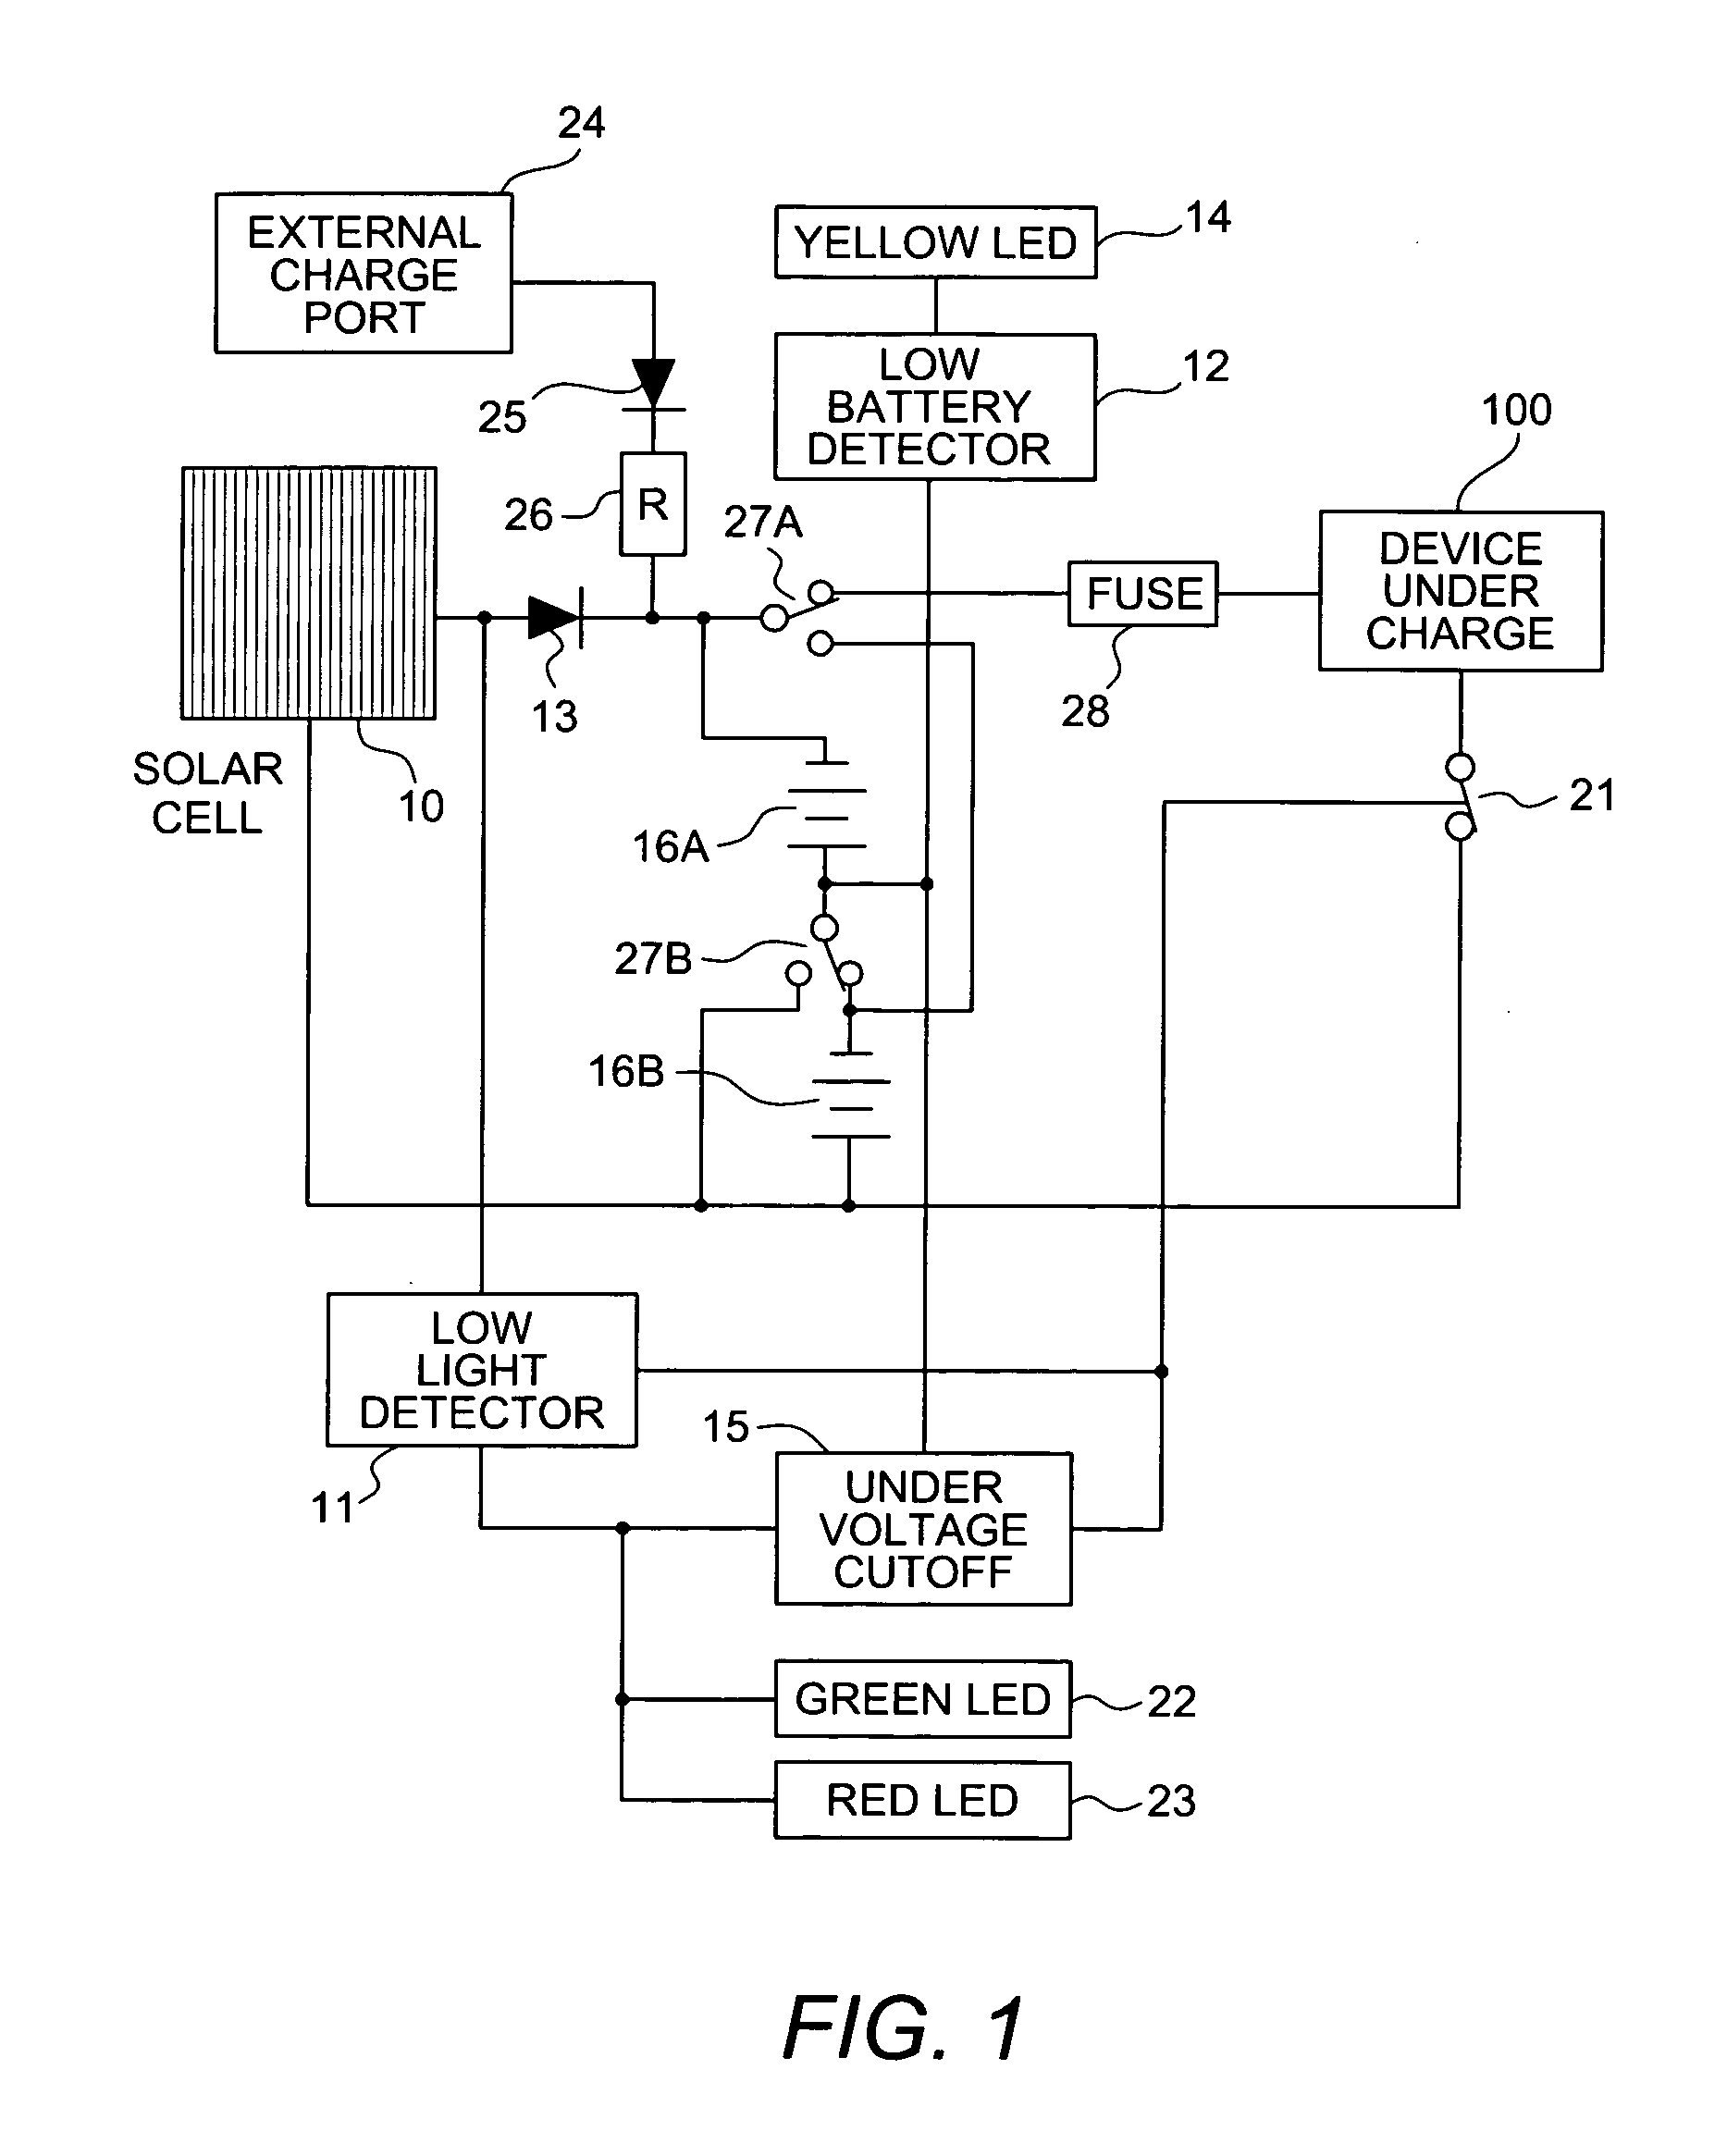 Electrical power source